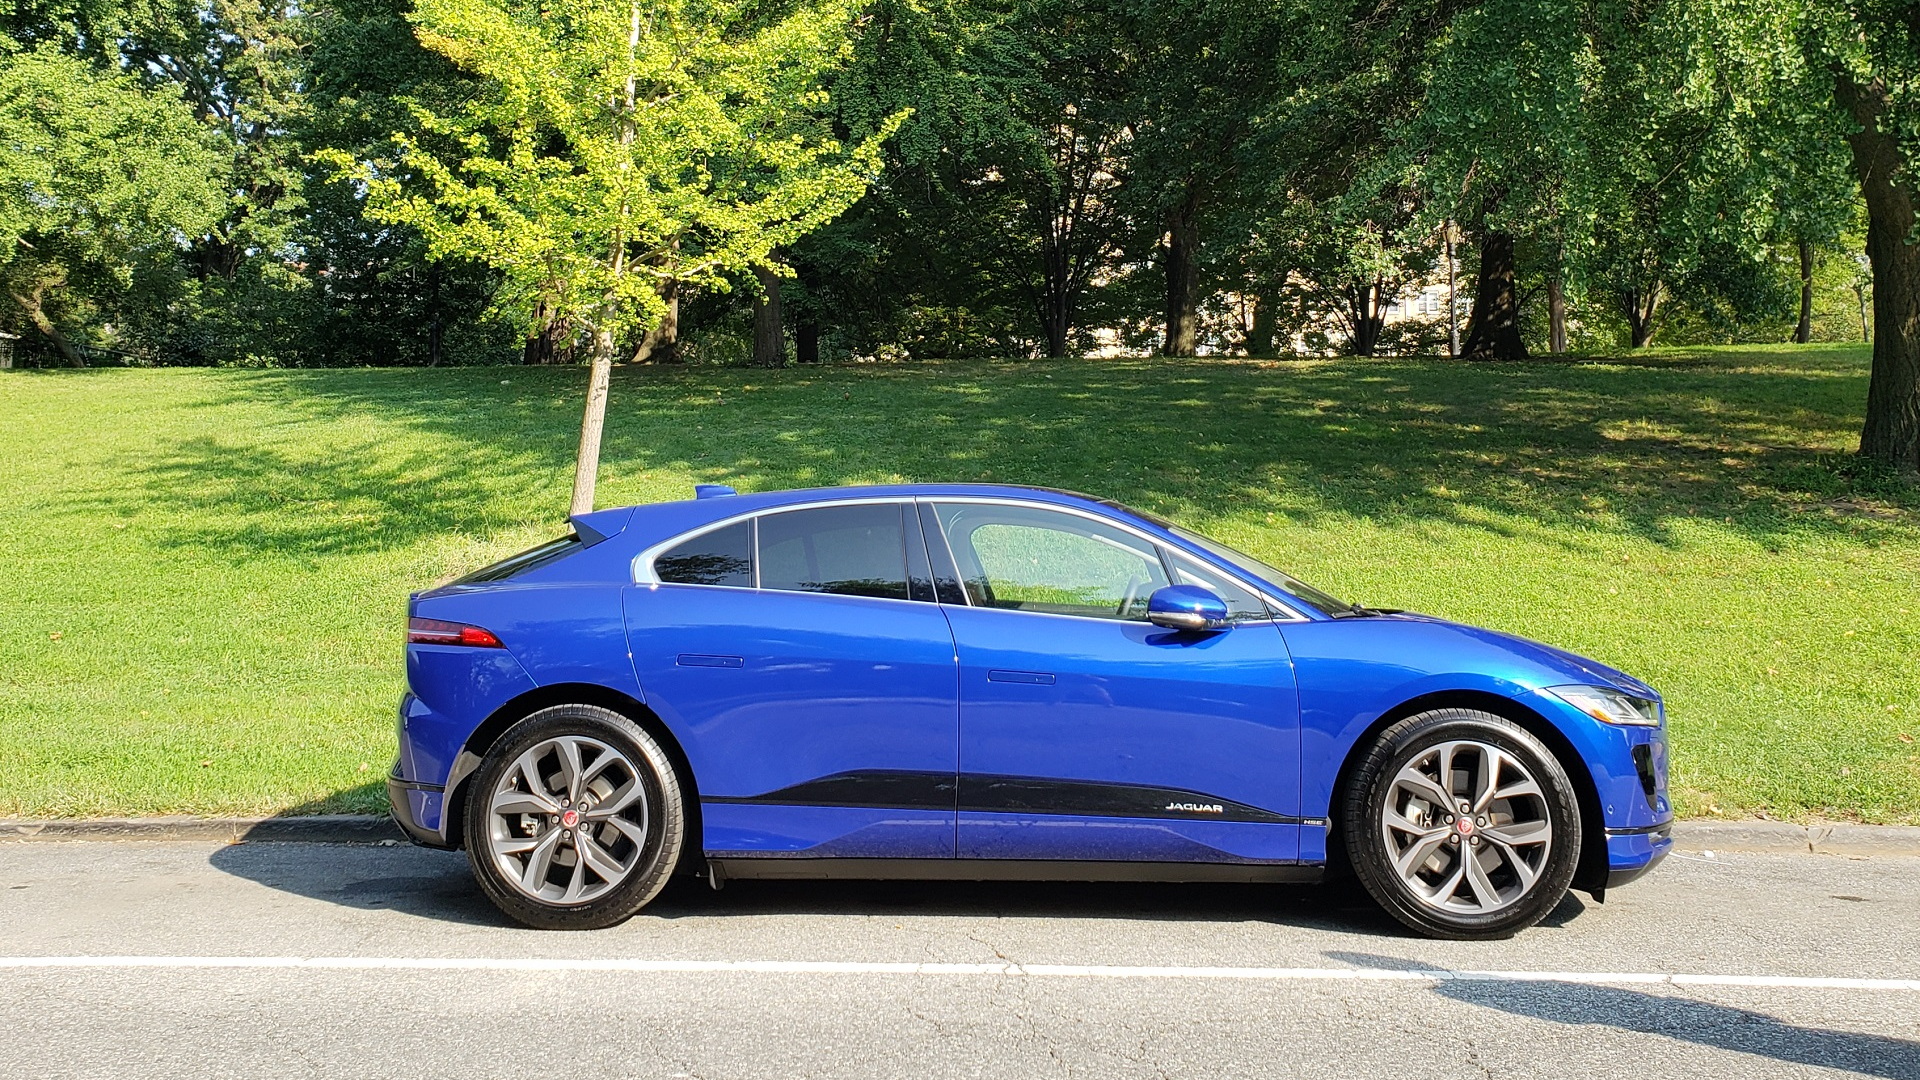 The 2019 Jaguar I-Pace, a city boy, and range anxiety